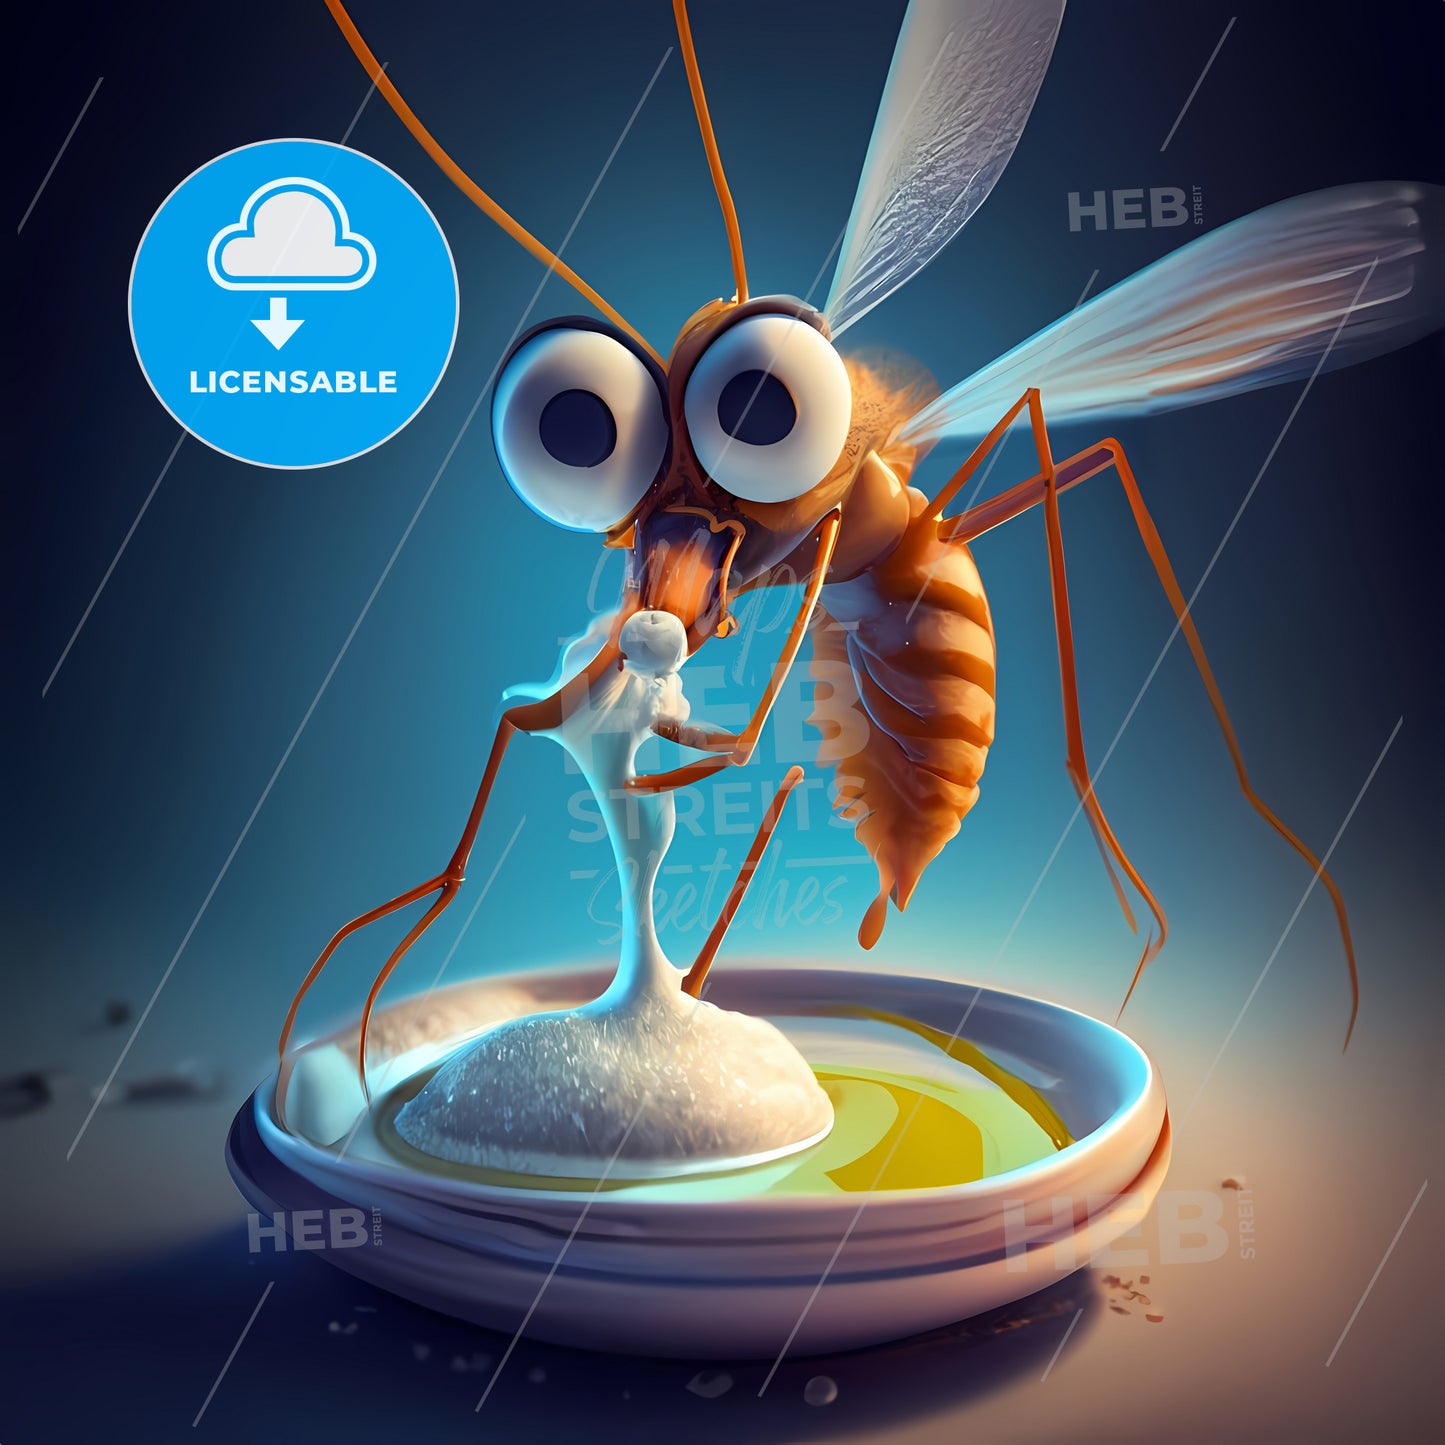 A Cartoon Of A Mosquito Eating A White Object